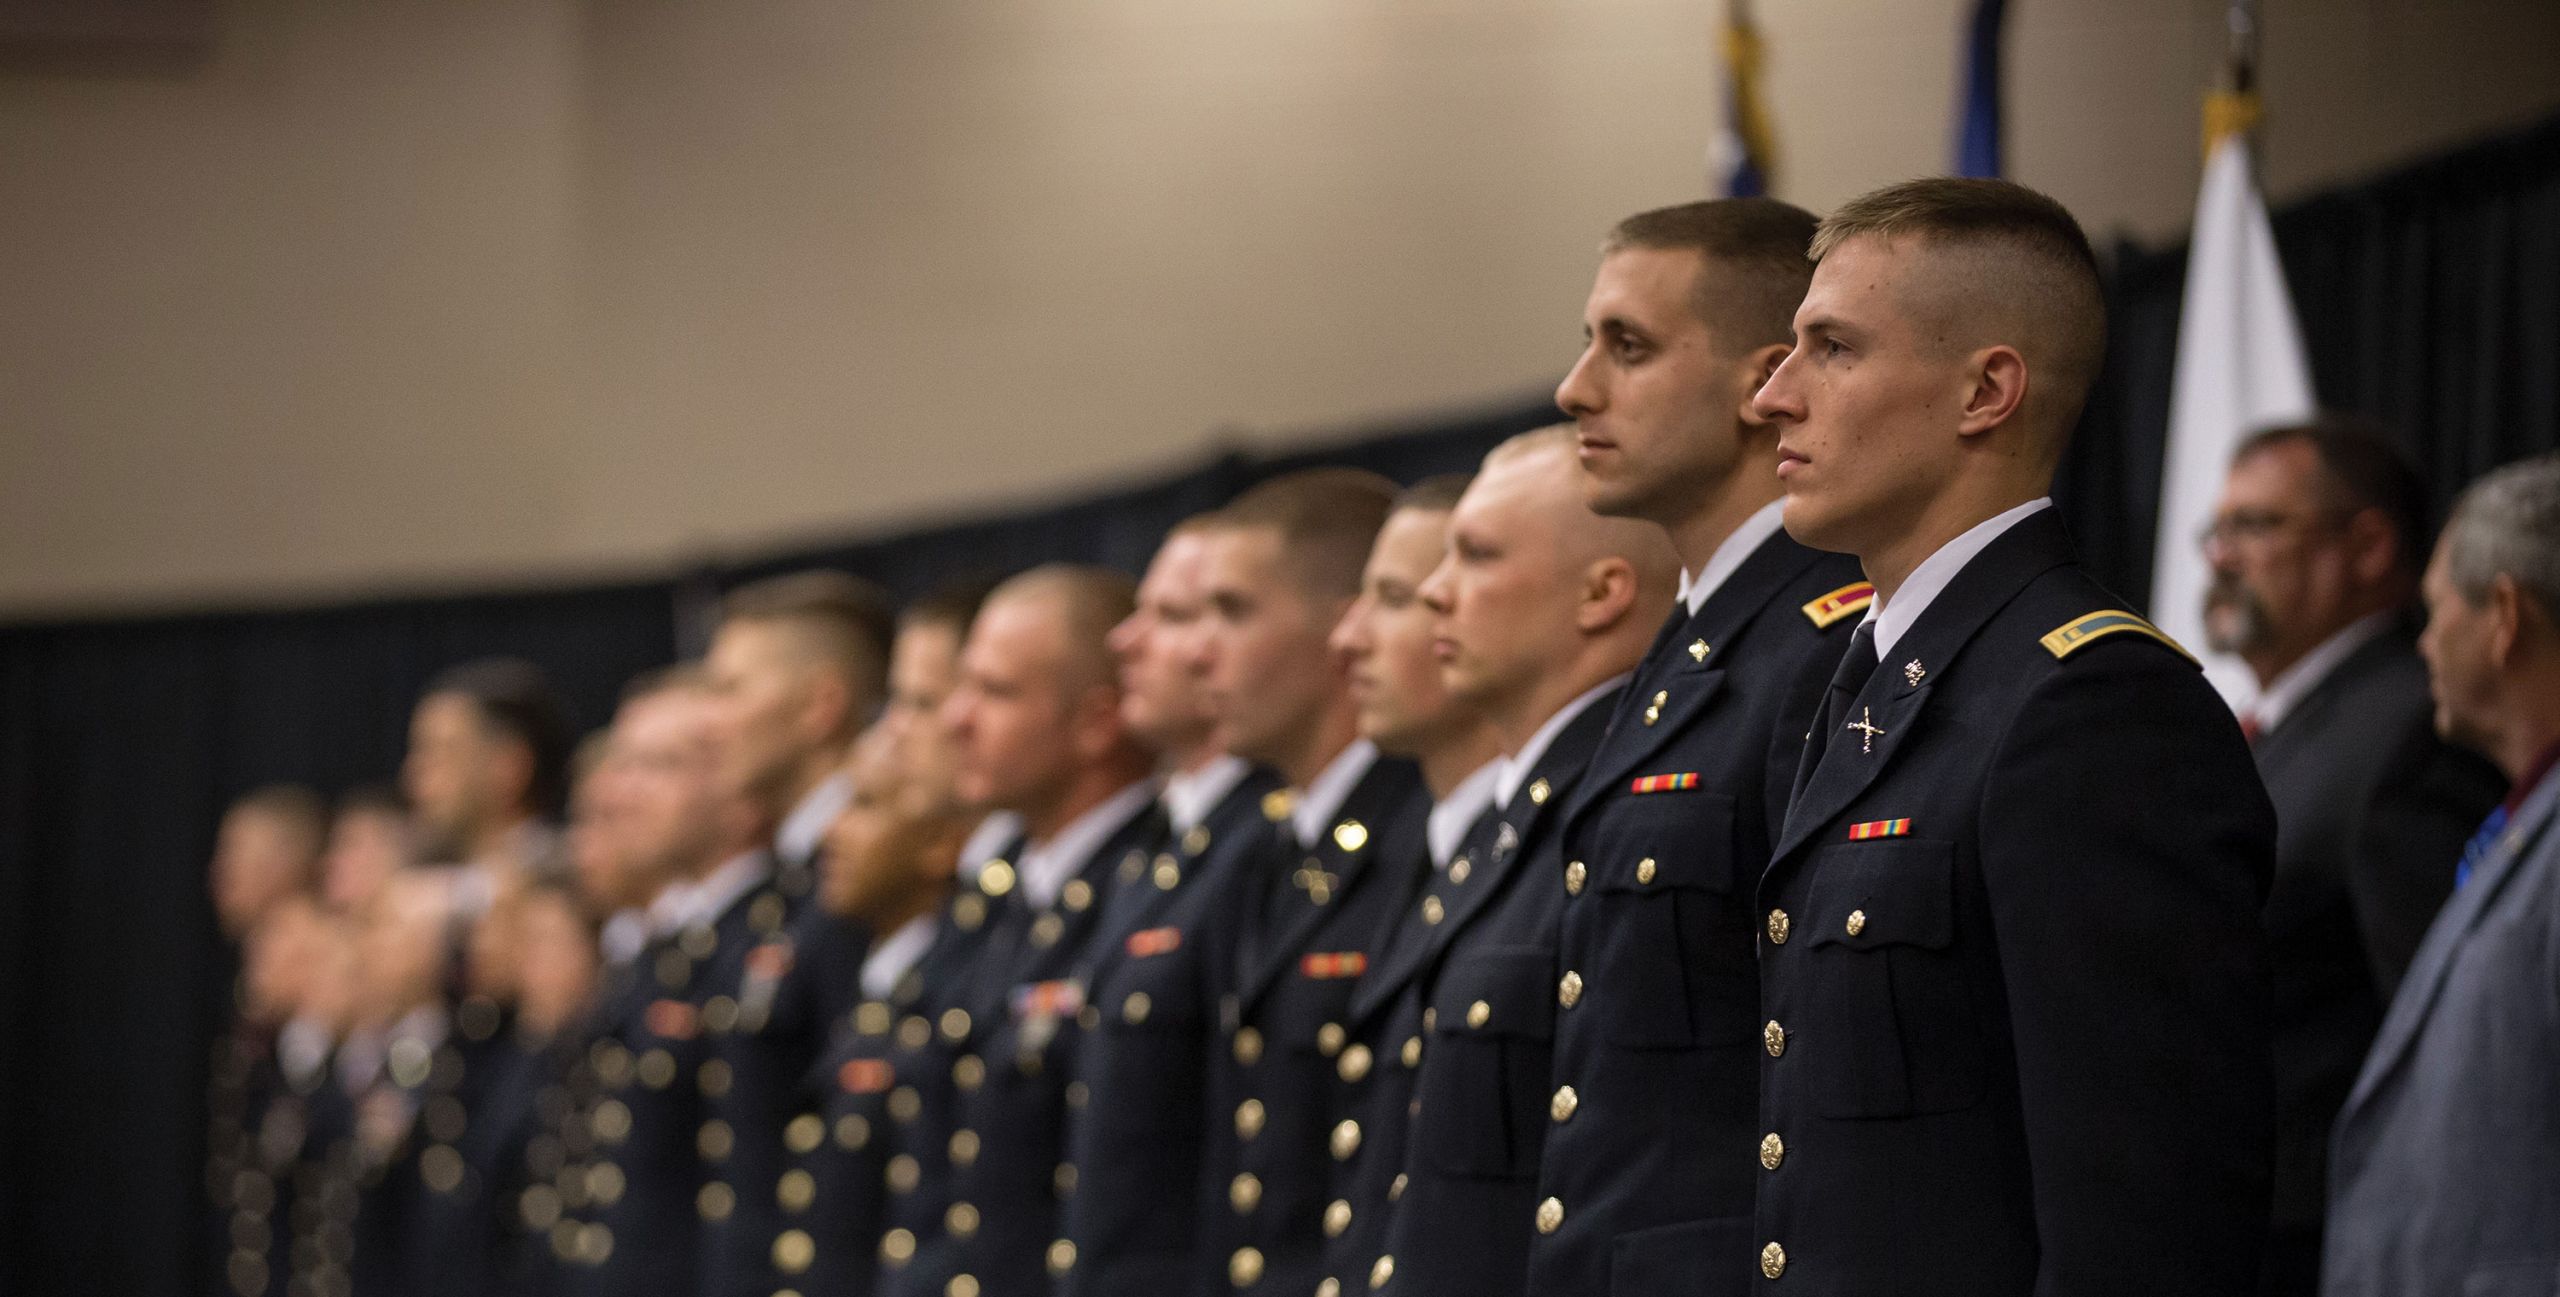 Liberty Army ROTC graduates are commissioned.